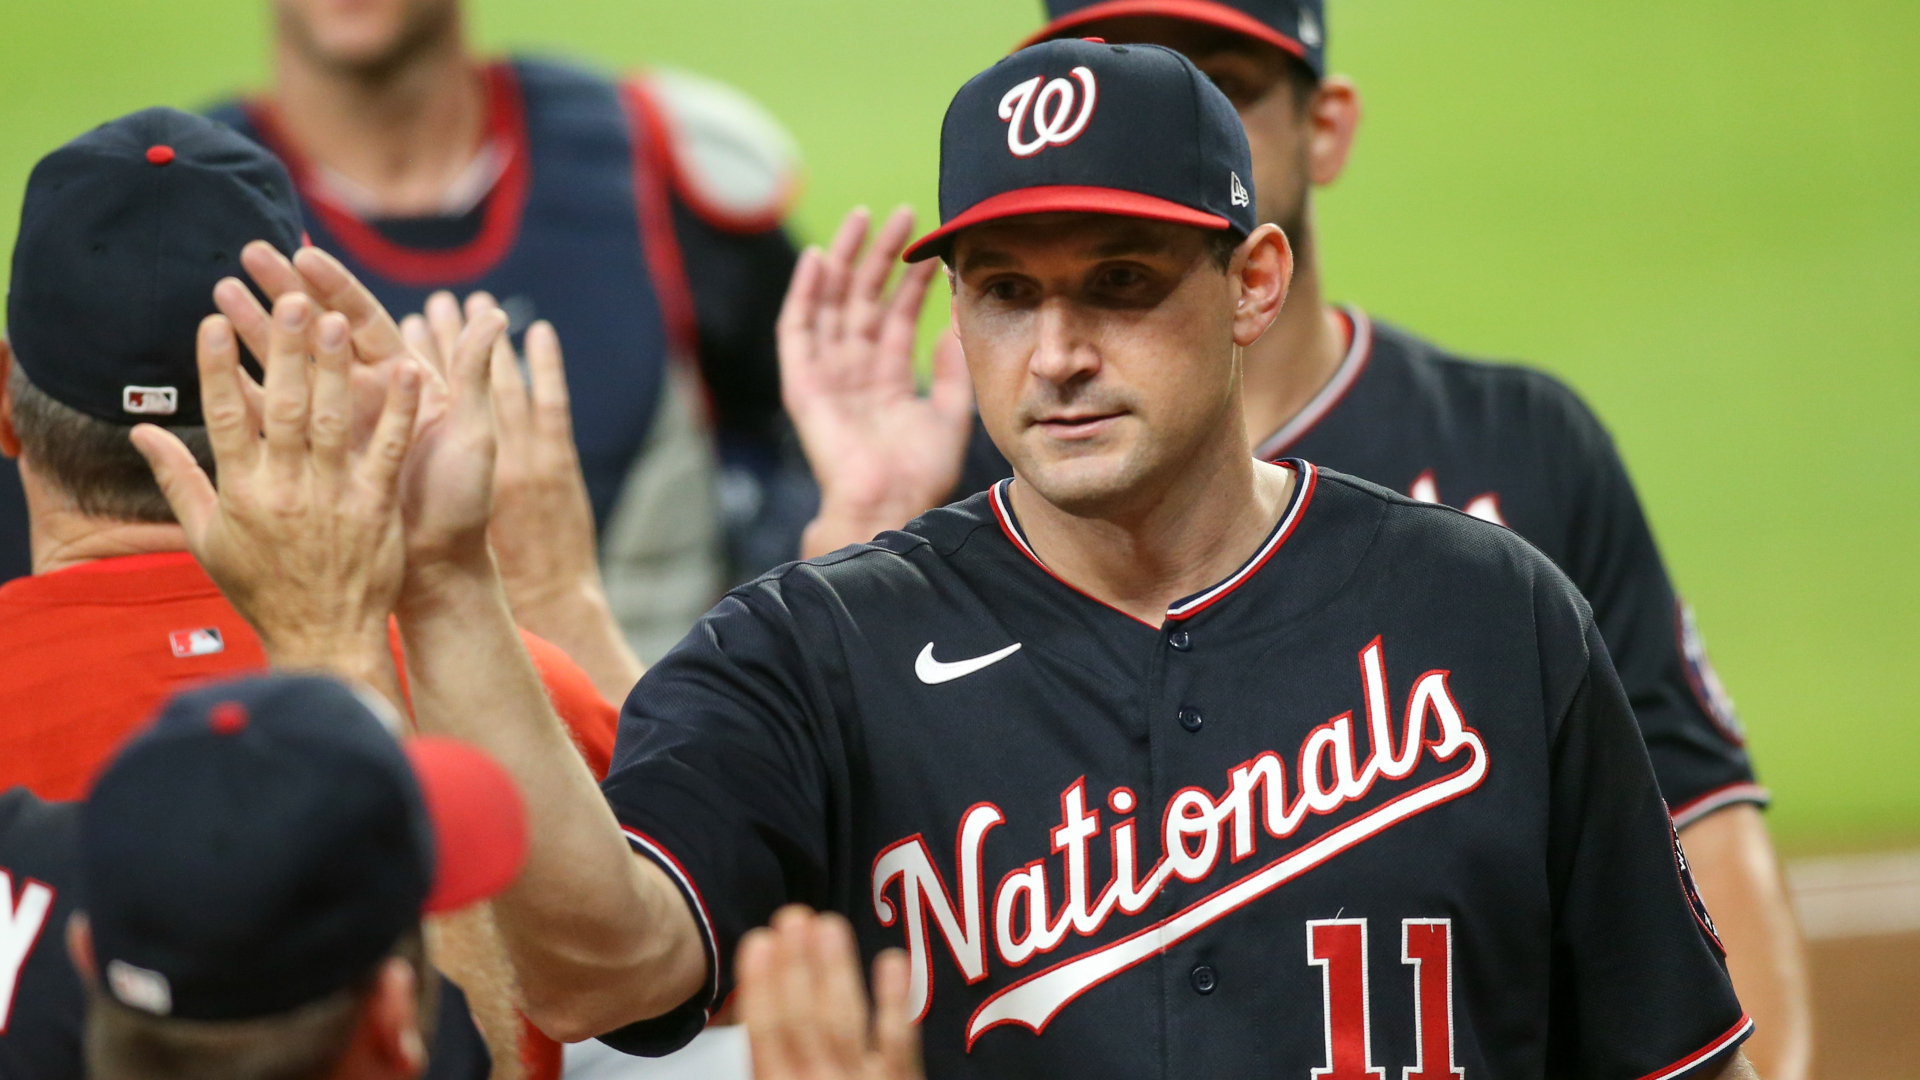 Ryan Zimmerman retires after 17 years with Nationals